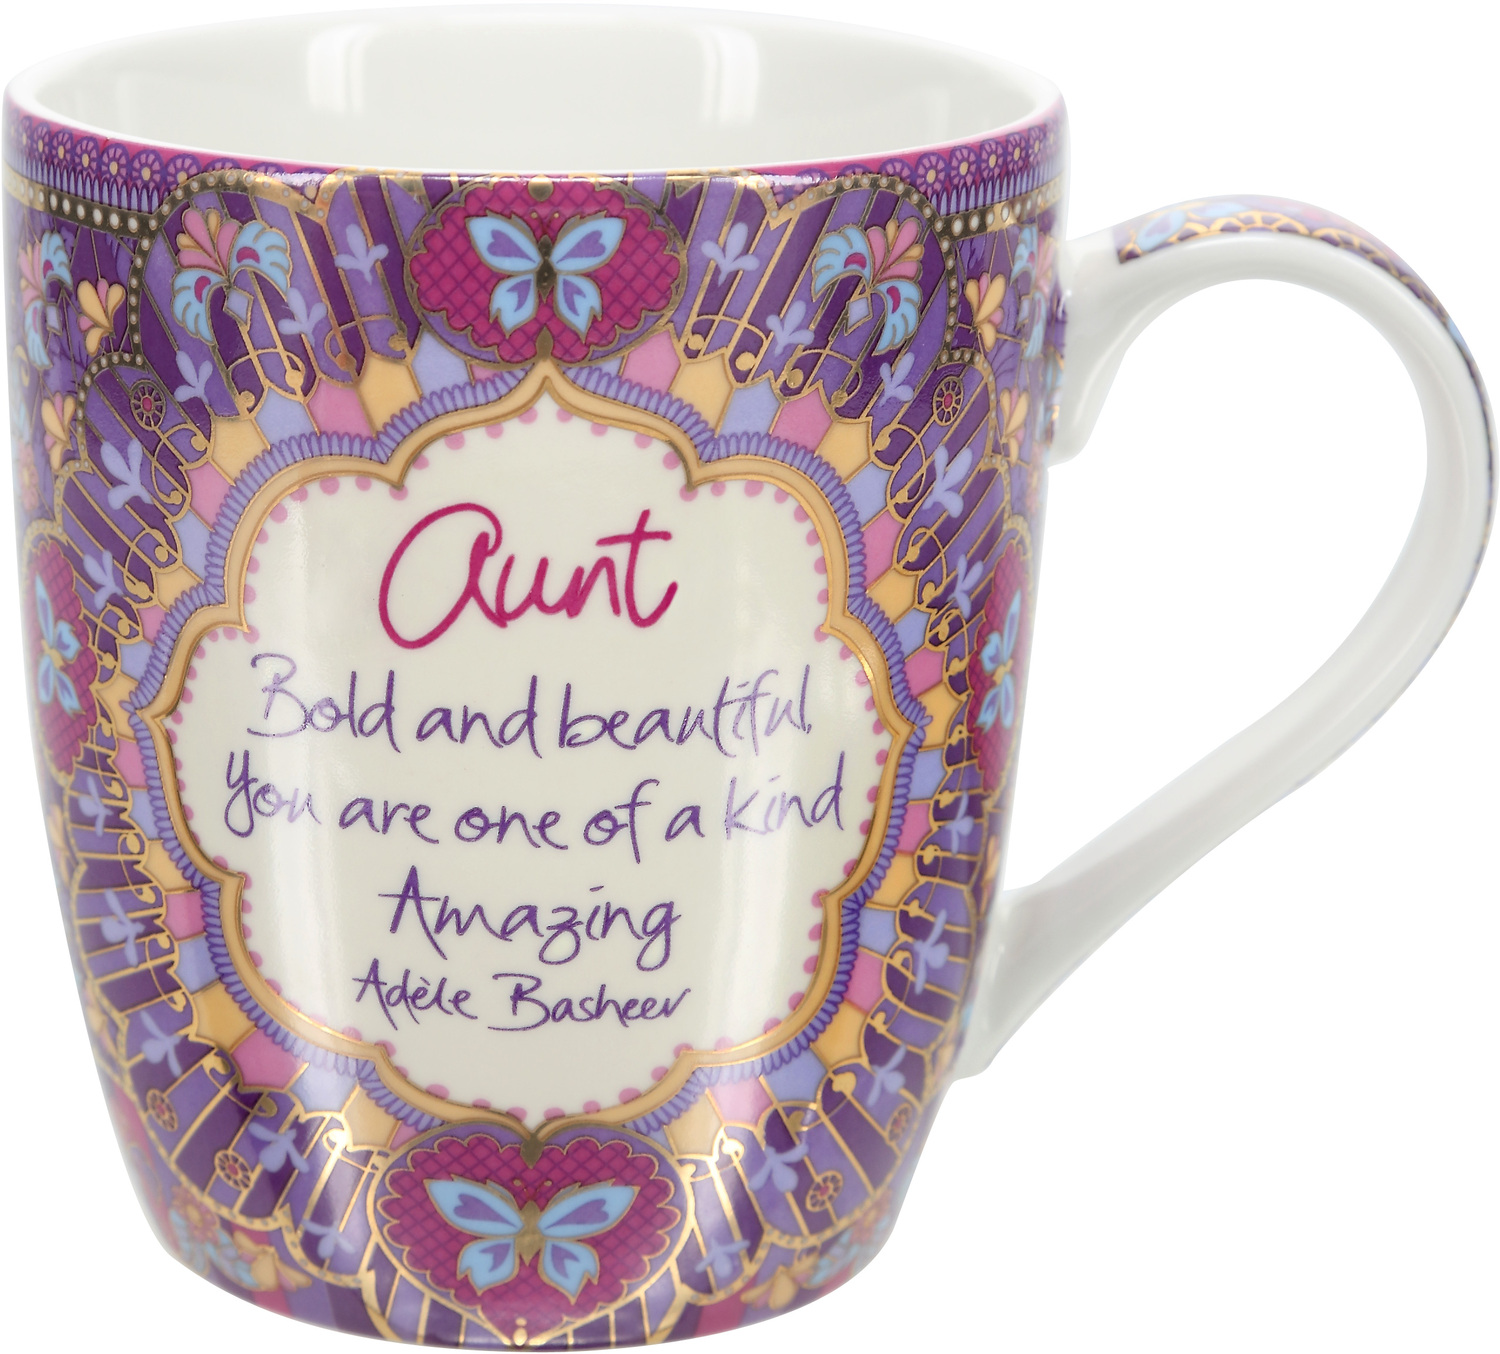 Aunt by Intrinsic - Aunt - 12 oz Cup with Gift Box